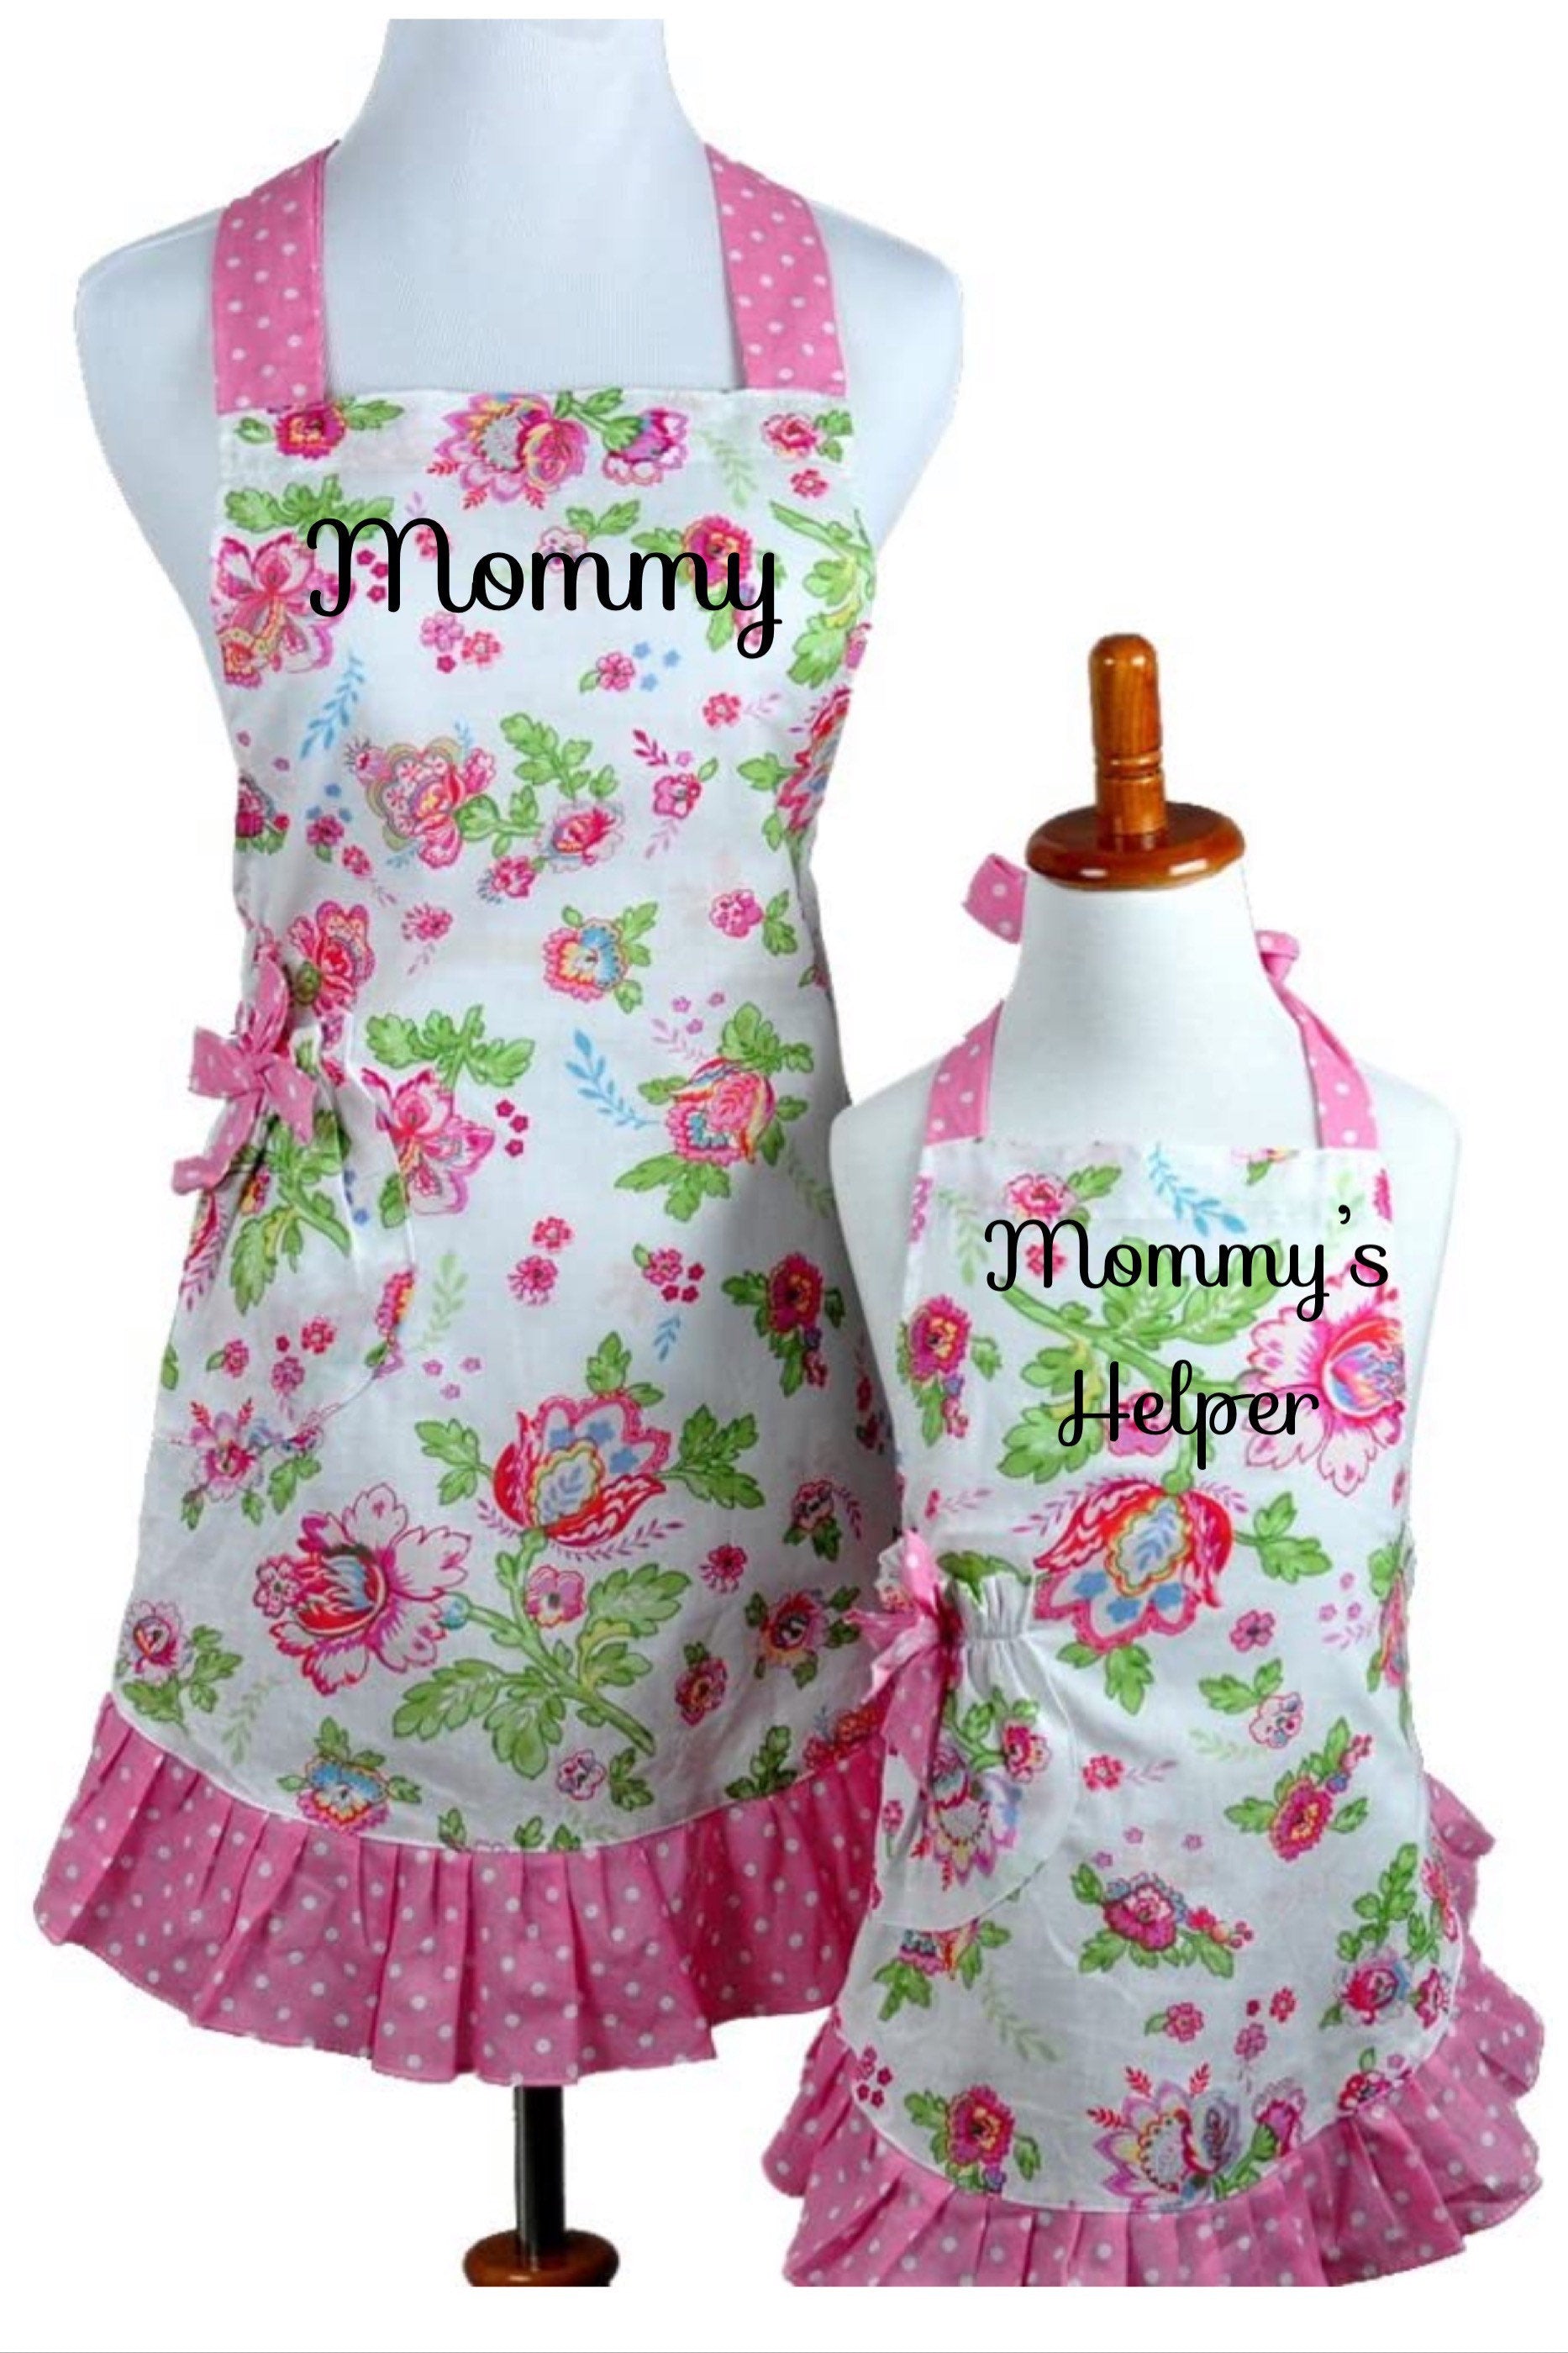 Mother Daughter Apron Set Personalized Pink Polka Dot Jessie Steele Mommy  and Me Apron Set Mom and Child Gift Idea Matching Aprons 